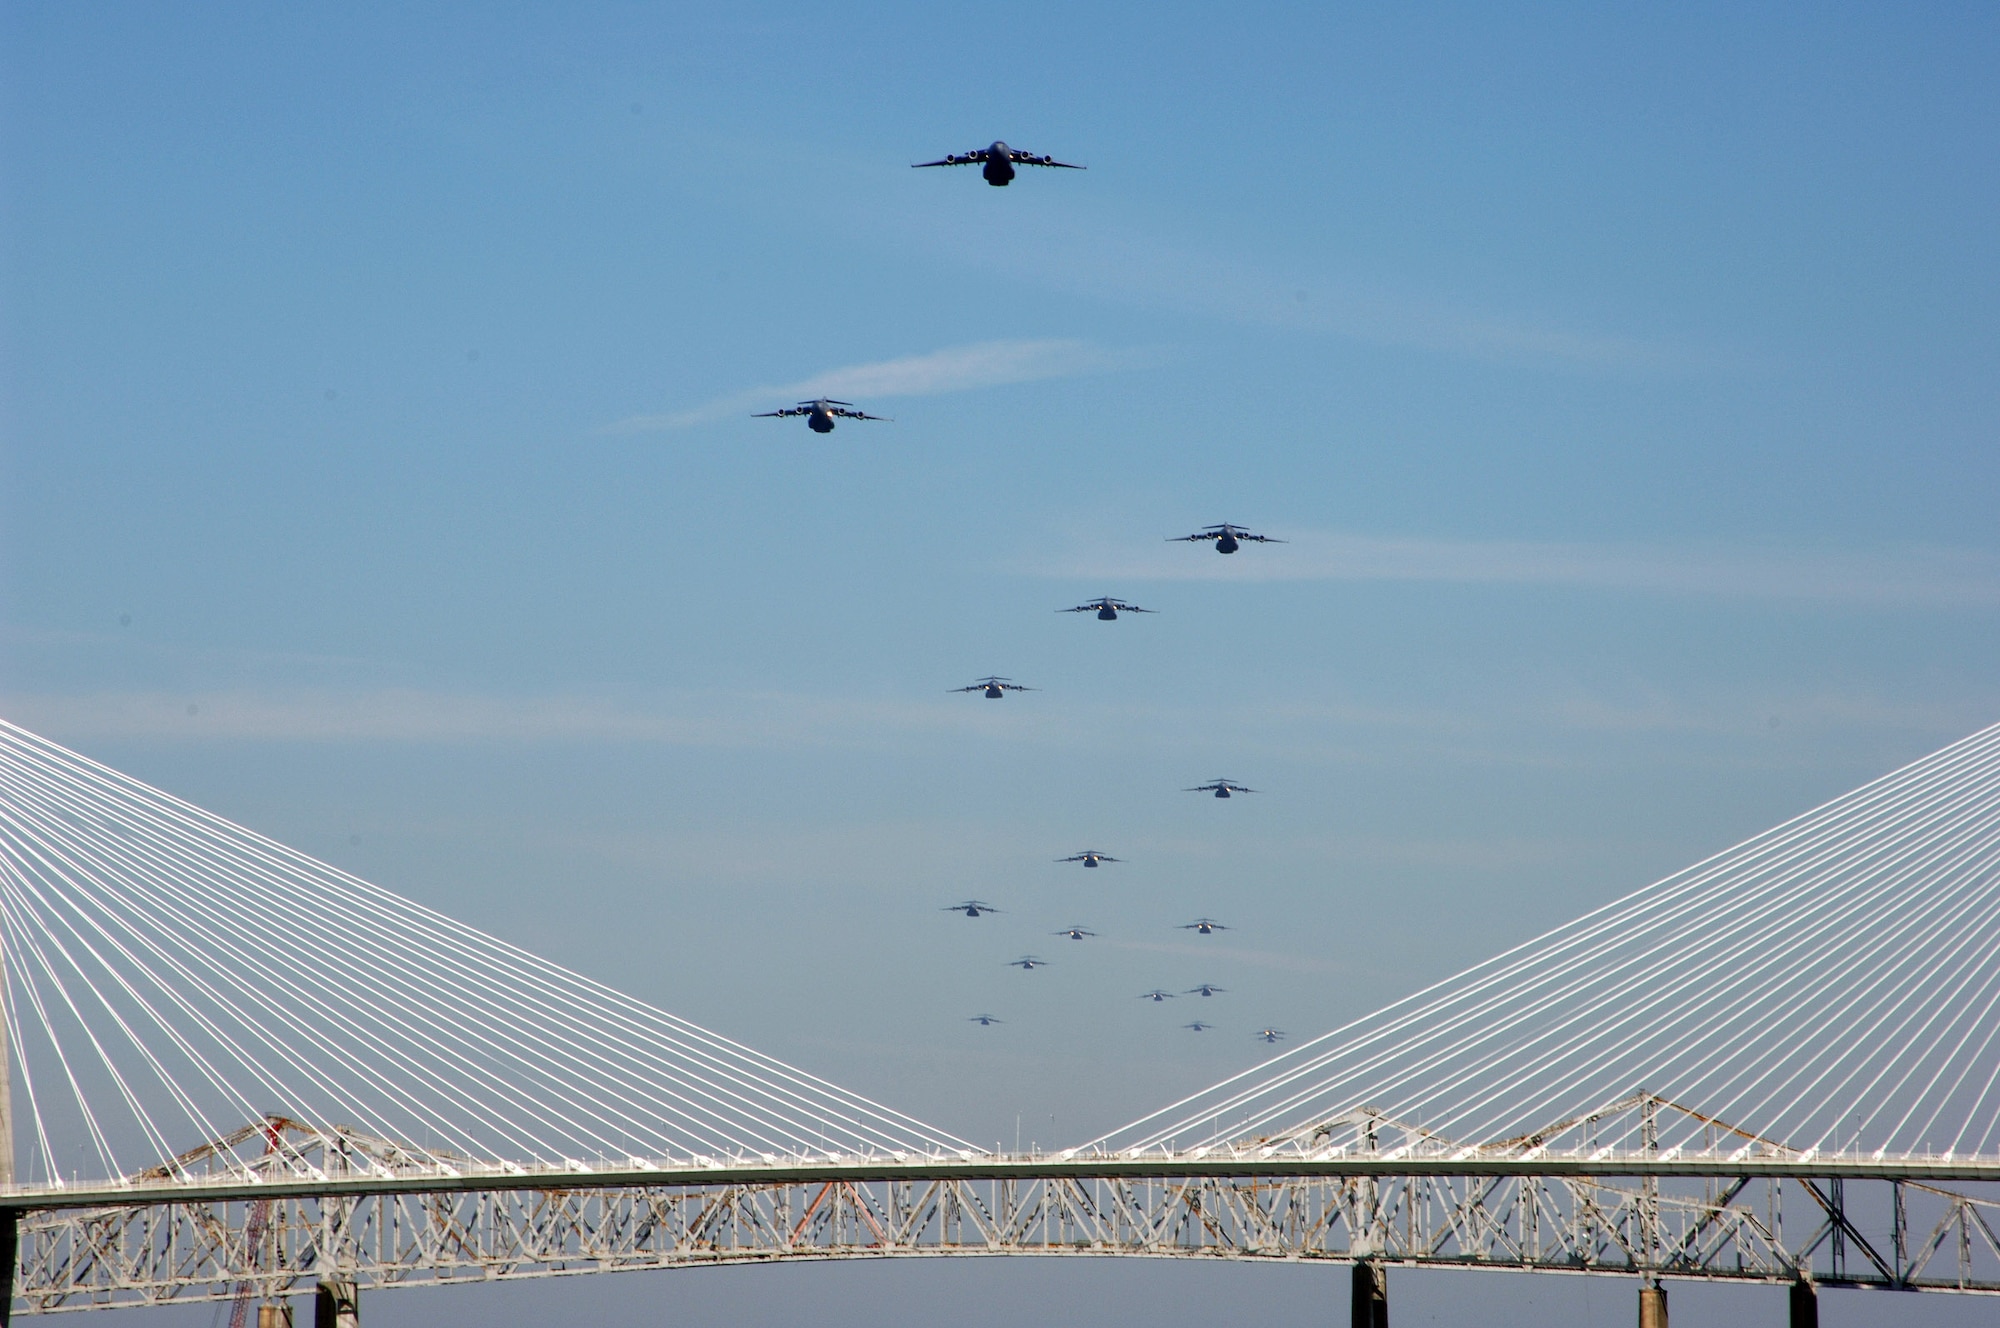 CHARLESTON, S.C. (AFPN) -- A formation of 17 C-17 Globemaster IIIs assigned to the 437th and 315th Airlift Wings at Charleston Air Force Base fly in formation.  The flight, which demonstrates the U.S. Air Force's strategic capability, is the largest formation of C-17s to take flight from a single base.  (U.S. Air Force photo by Tech. Sgt. Richard T. Kaminsky)
